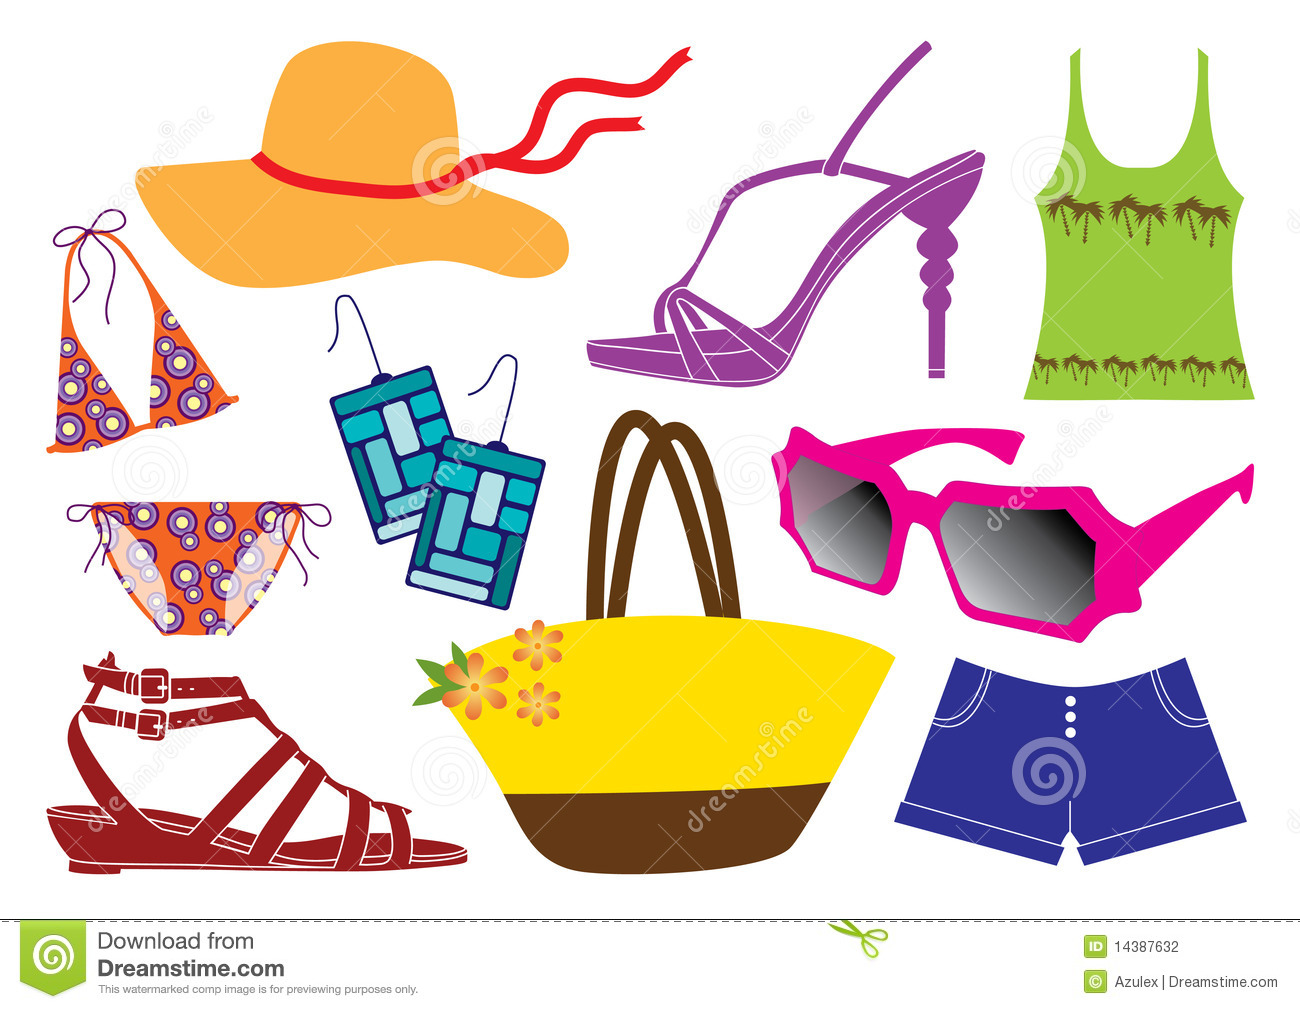 Sunny weather clipart.